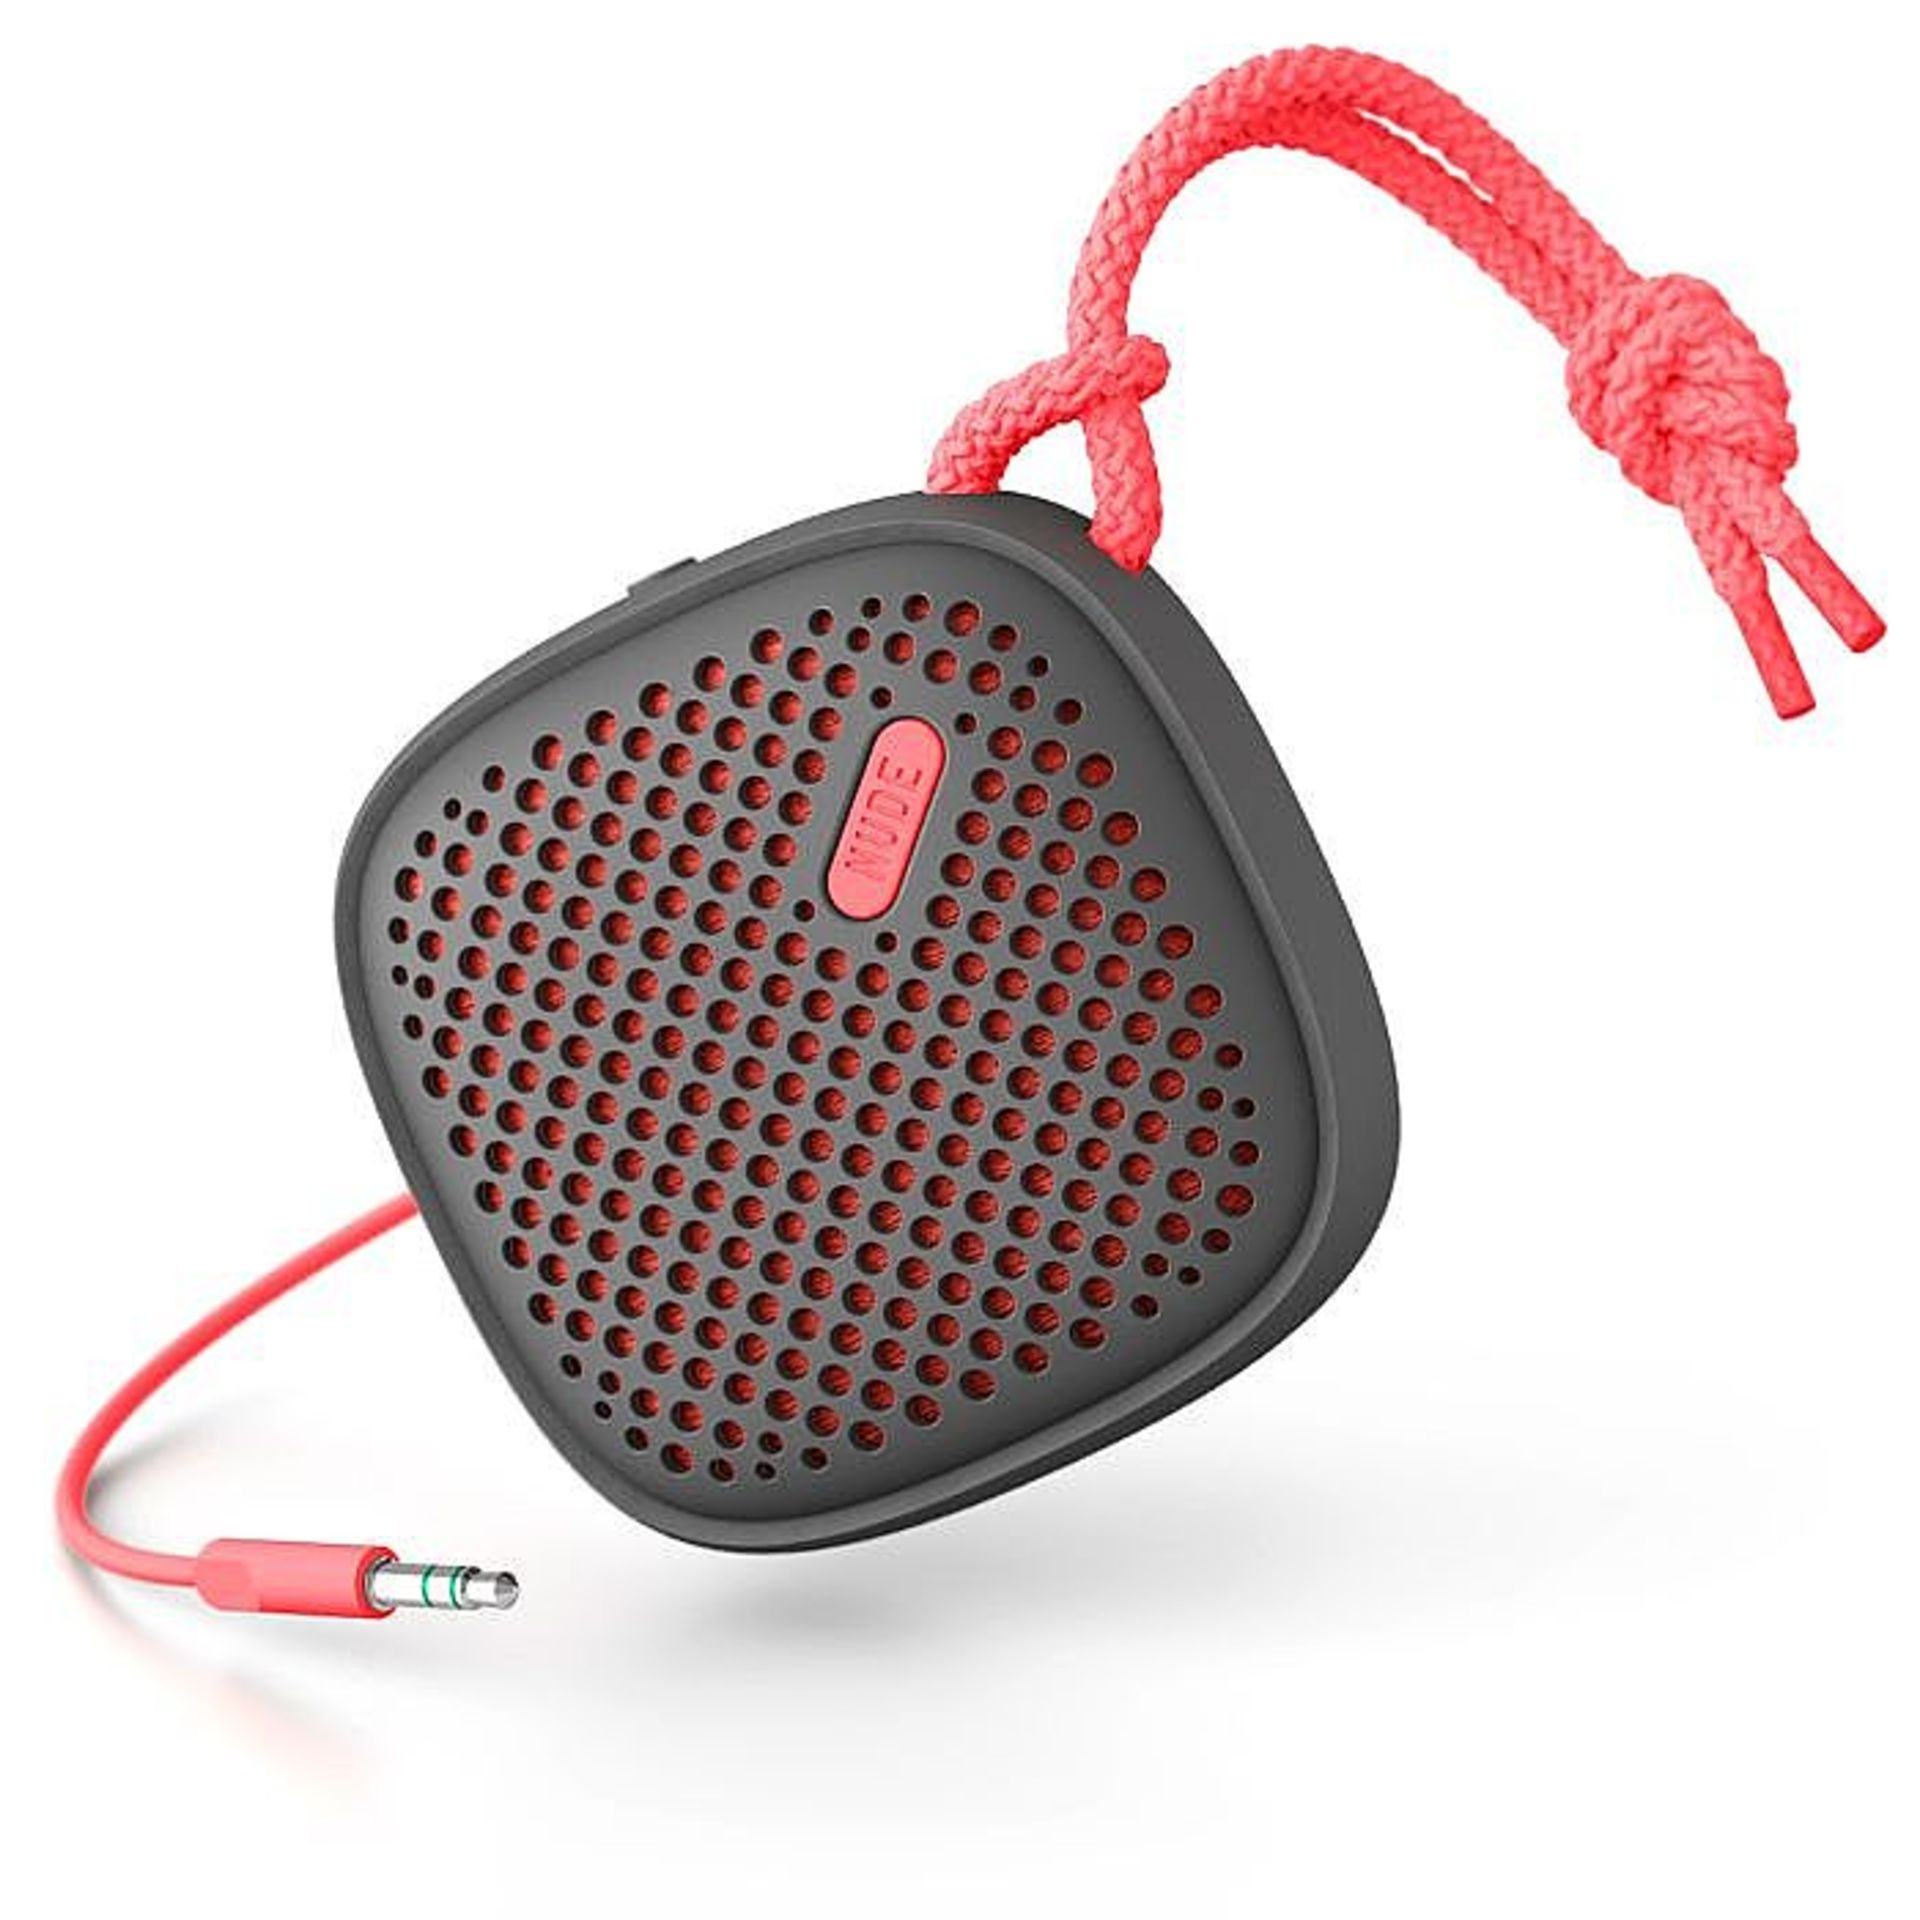 V Brand New Nude Audio Move S Wired Portable Speaker - Coral X 2 YOUR BID PRICE TO BE MULTIPLIED